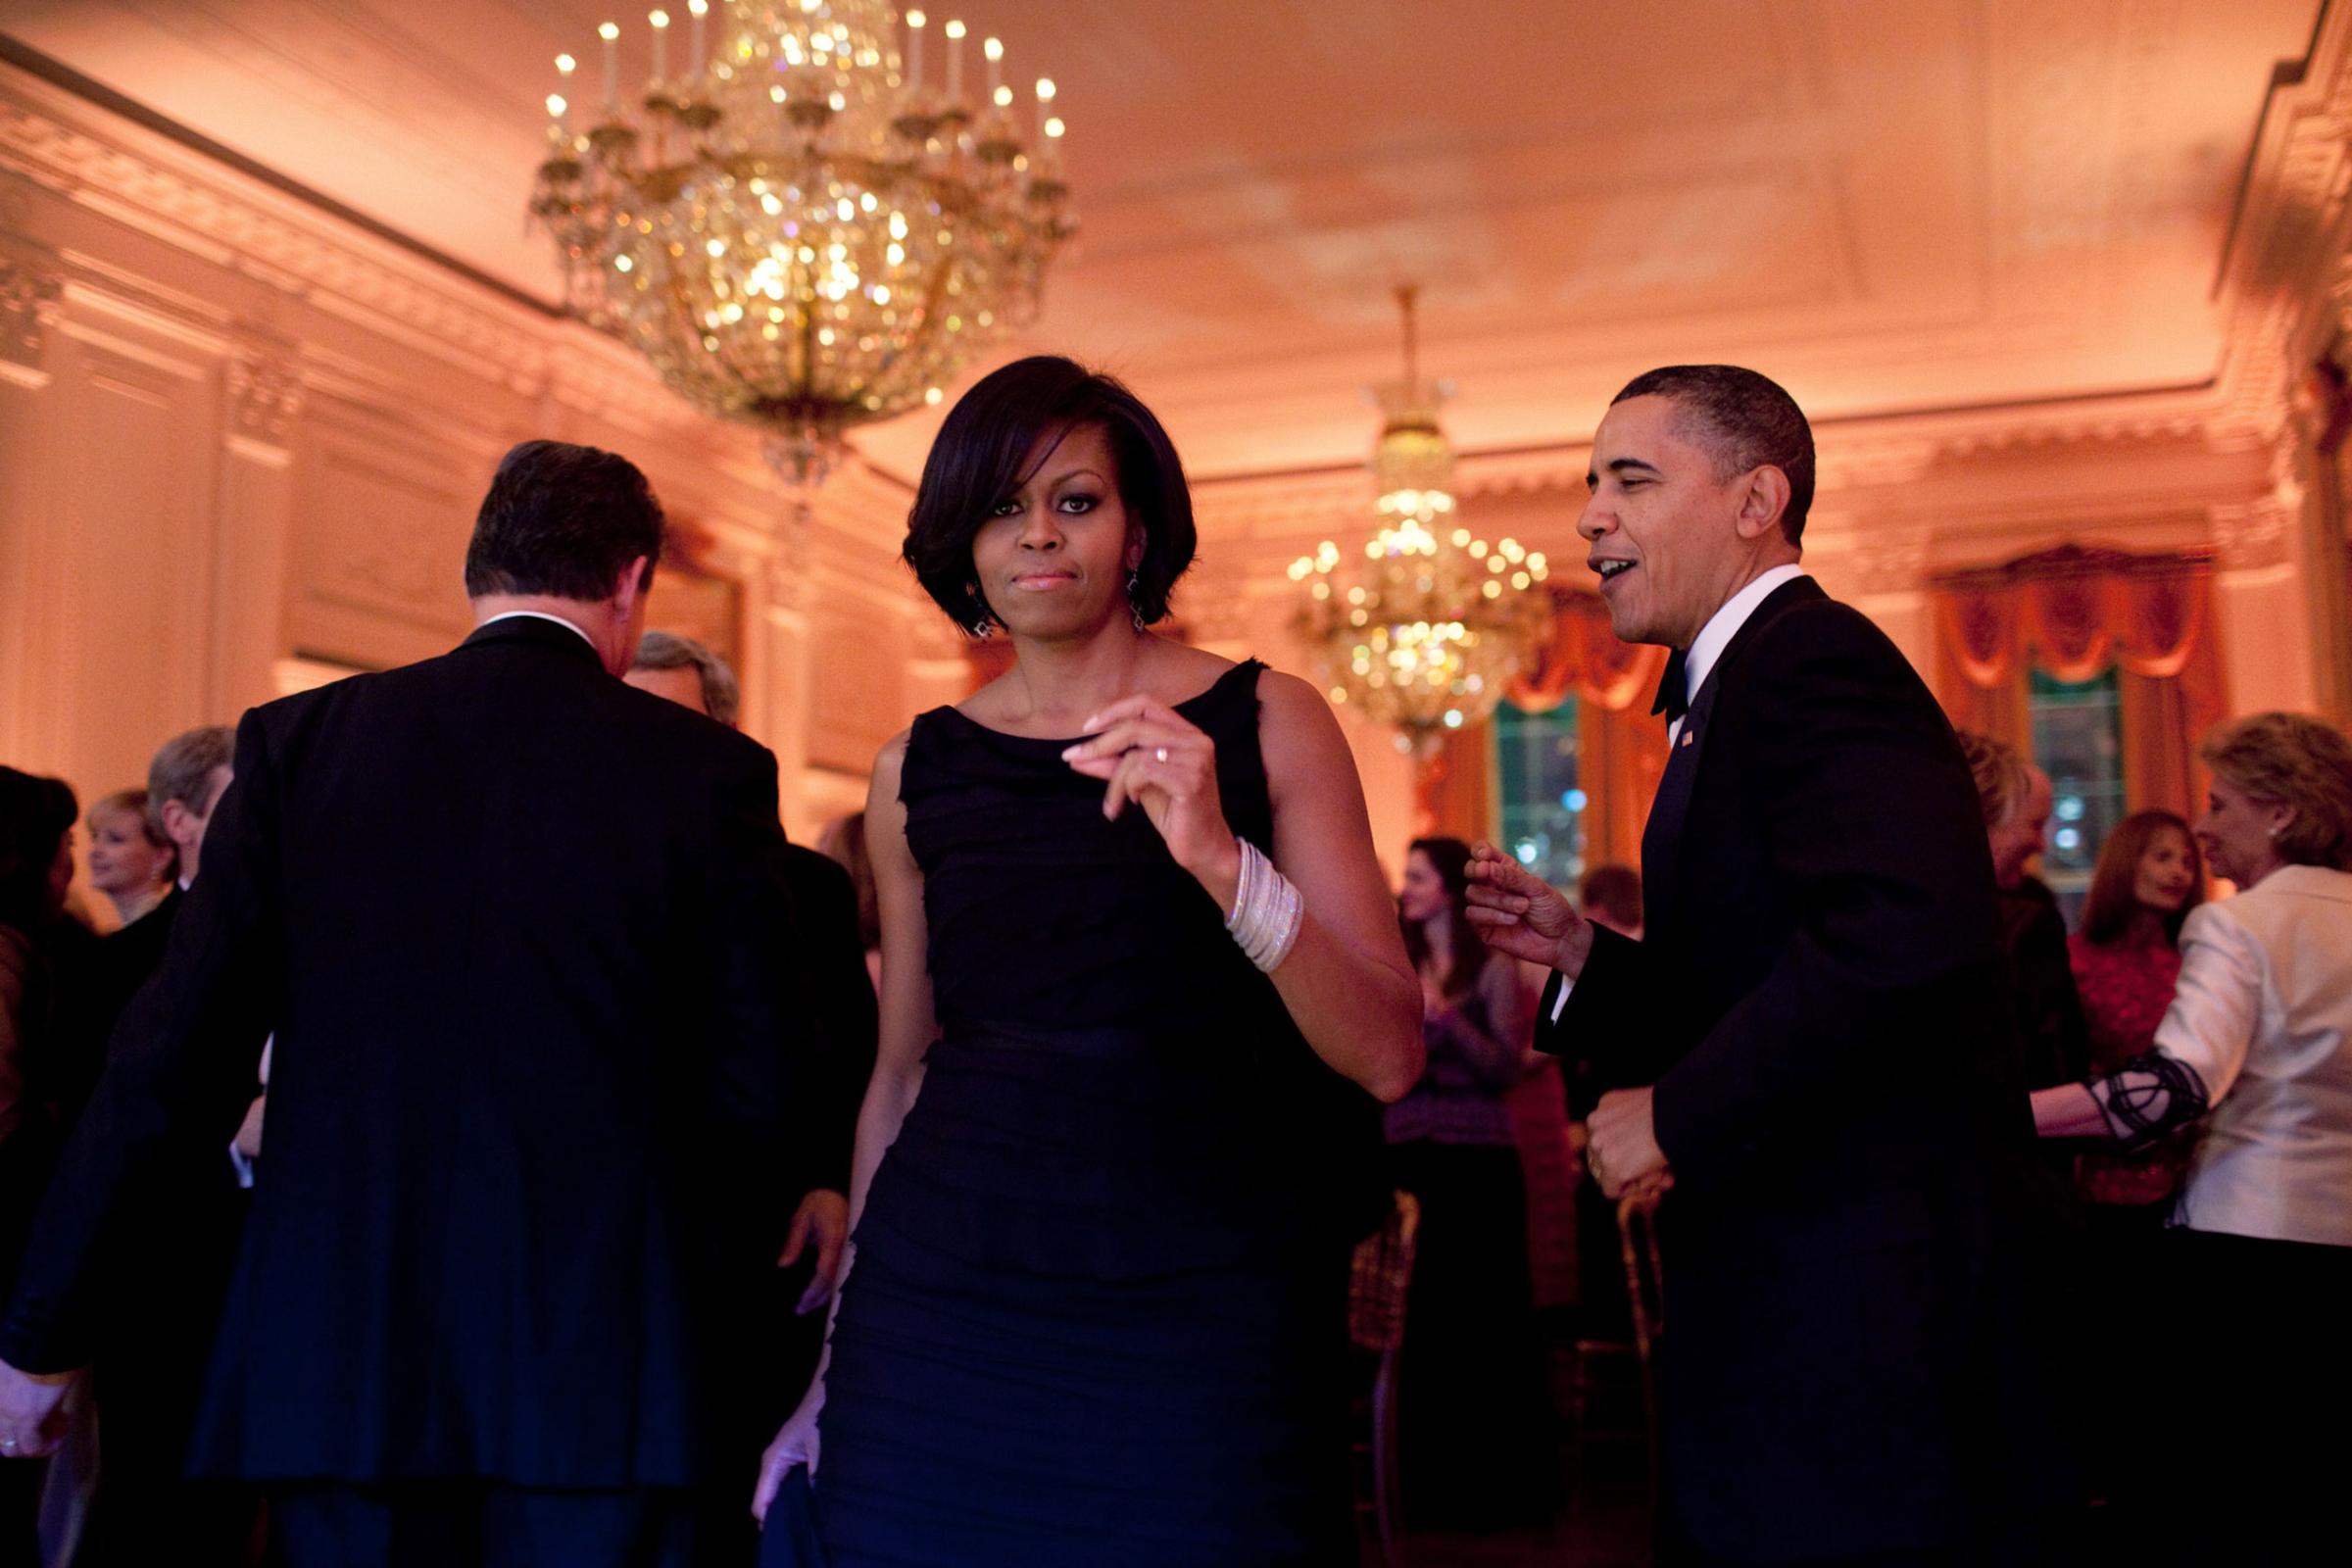 "The President and First Lady were dancing along to the music of the Harry Connick, Jr., Big Band at the Governors Ball. Mrs. Obama turned towards me and, for one split second, looked right at me. Usually I strive to capture moments when the subjects are unaware of the camera. But this an exception where I actually liked that she was looking at me, Feb. 21, 2010. "